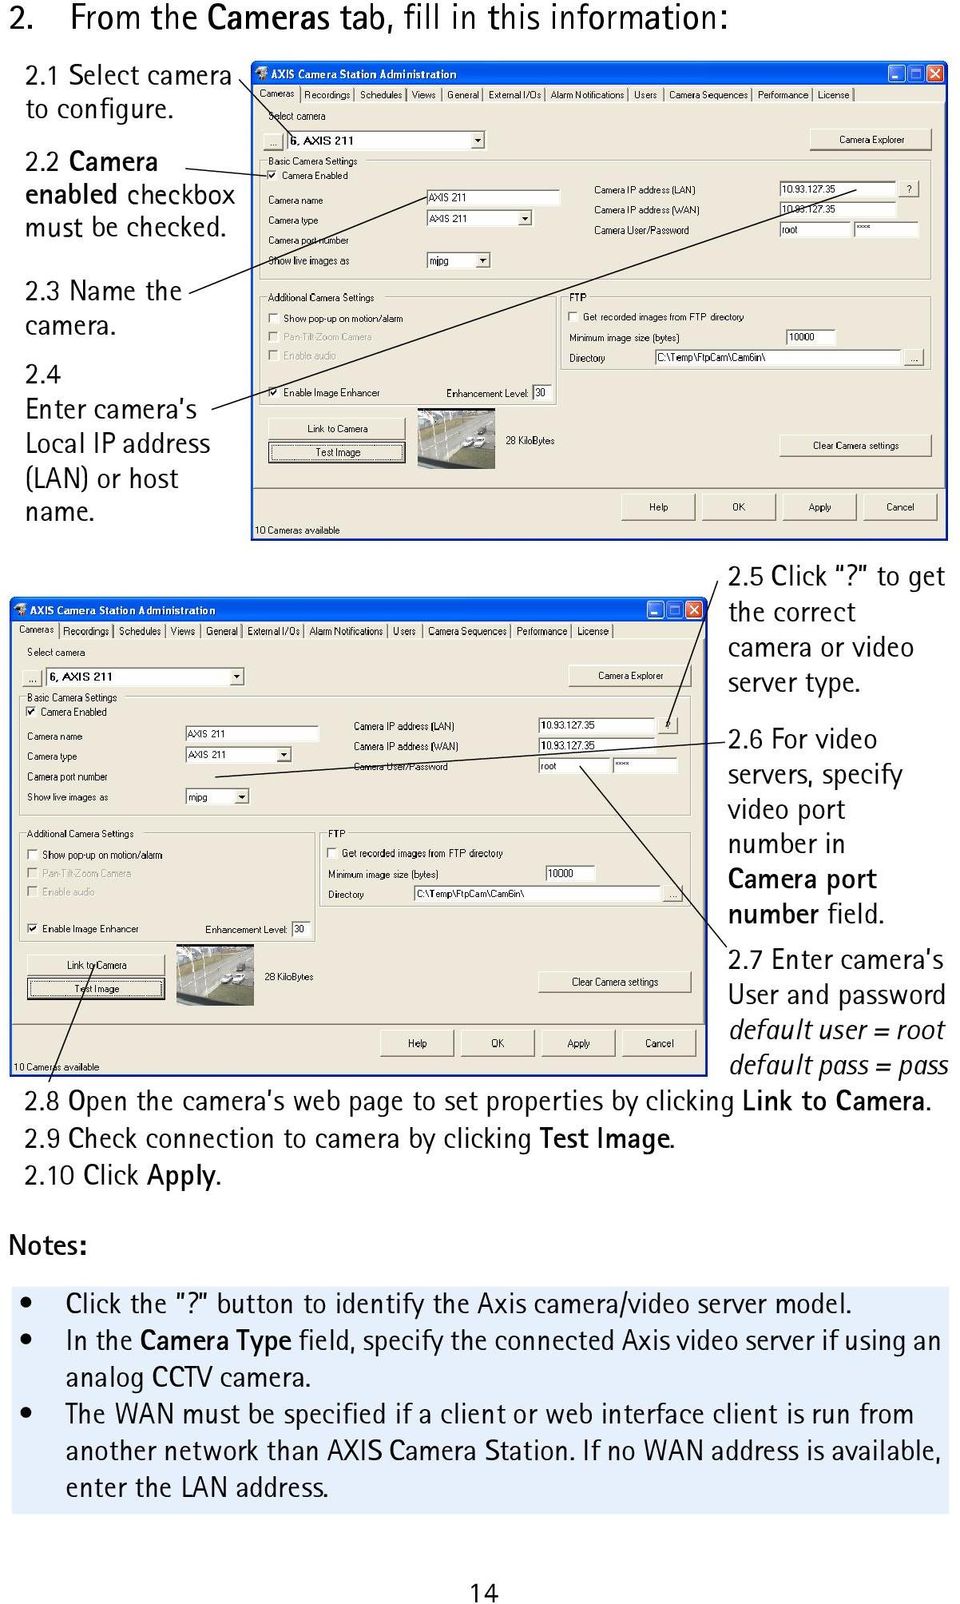 8 Open the camera s web page to set properties by clicking Link to Camera. 2.9 Check connection to camera by clicking Test Image. 2.10 Click Apply. Click the?